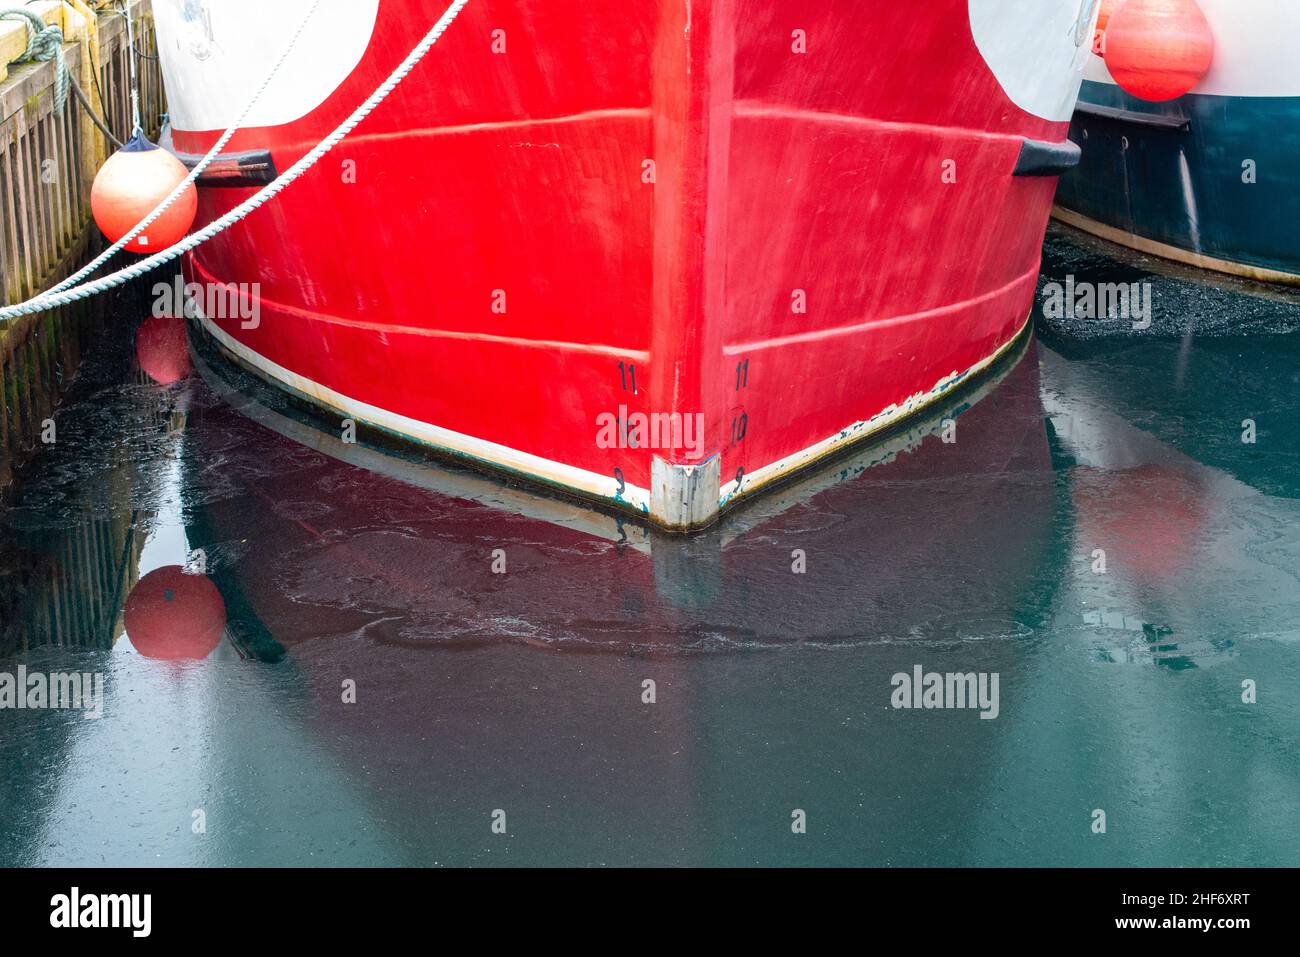 A vibrant red metal ship with black and white waterline measurement markers or load lines on the hull of the vessel. The meter numbers 11,10, and 9. Stock Photo